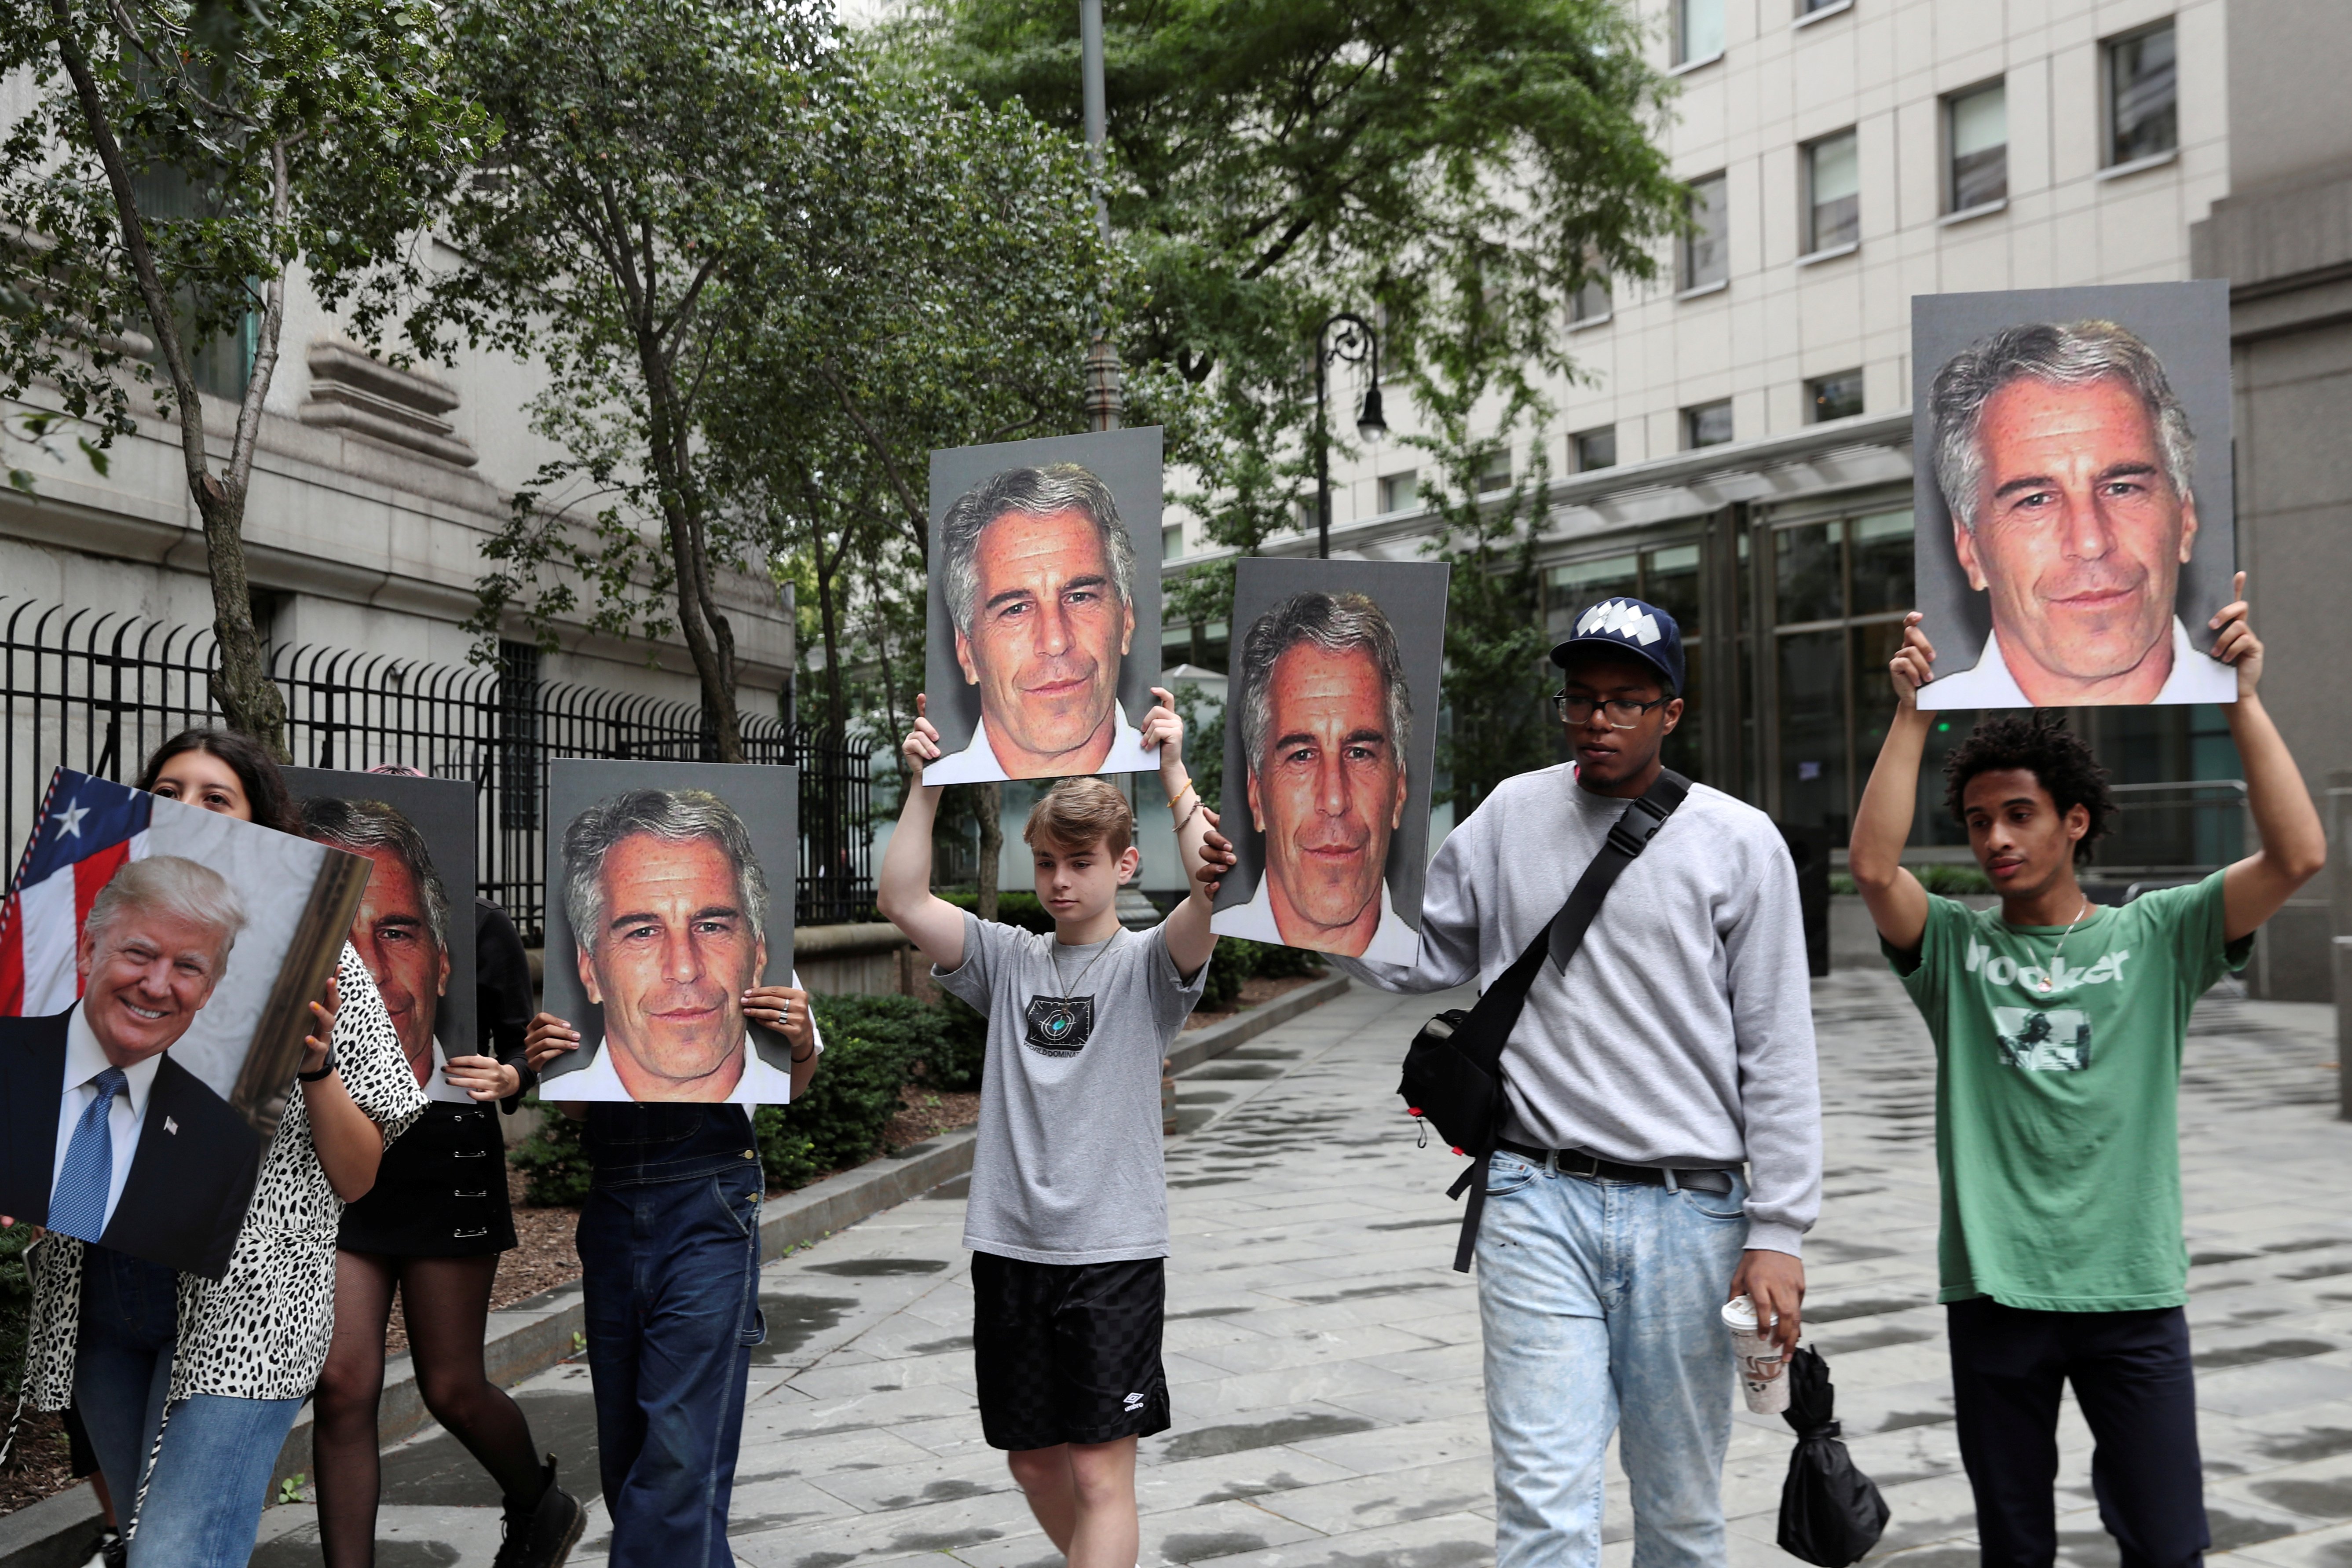 Demonstrators hold signs aloft protesting Jeffrey Epstein, as he awaits arraignment in the Southern District of New York on charges of sex trafficking of minors and conspiracy to commit sex trafficking of minors, in New York, U.S., July 8, 2019. REUTERS/Shannon Stapleton 